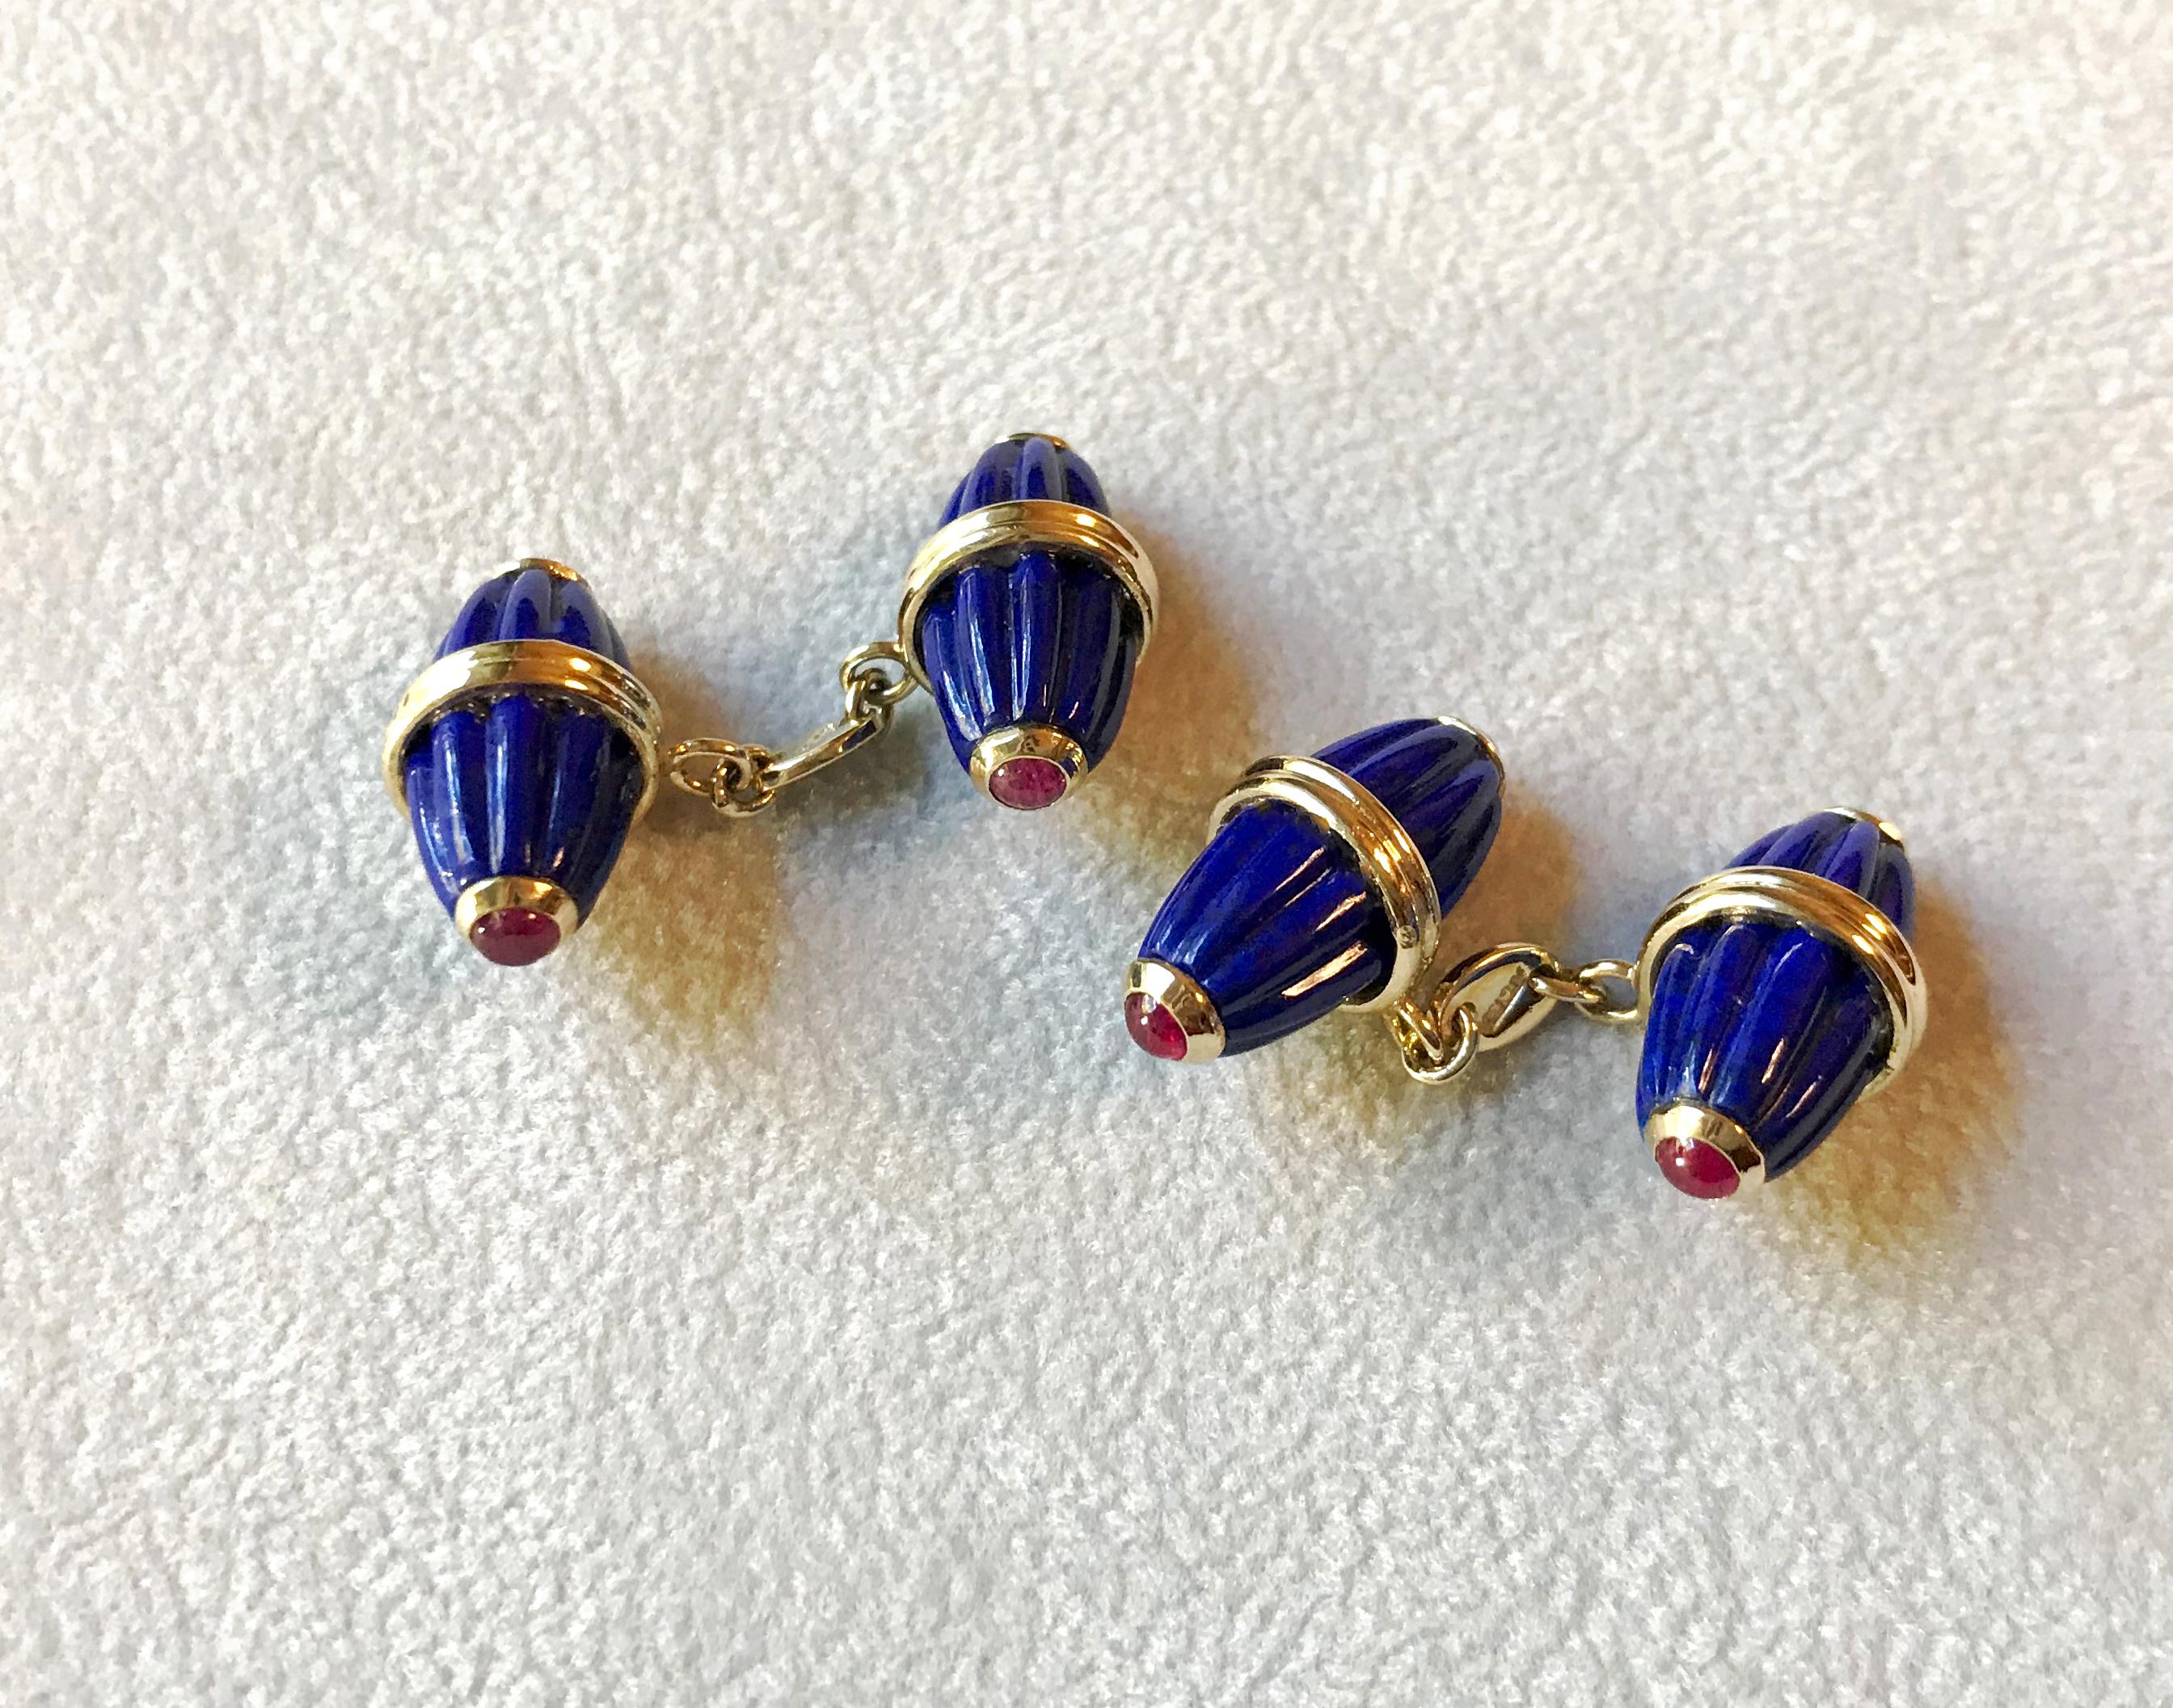 These striking cufflinks feature identical front face and toggle whose oval shapes evokes the silhouette of a barrel, carved with grooves that add dynamism to their texture. They are made of lapis lazuli, adorned with cabochon rubies at the edges.